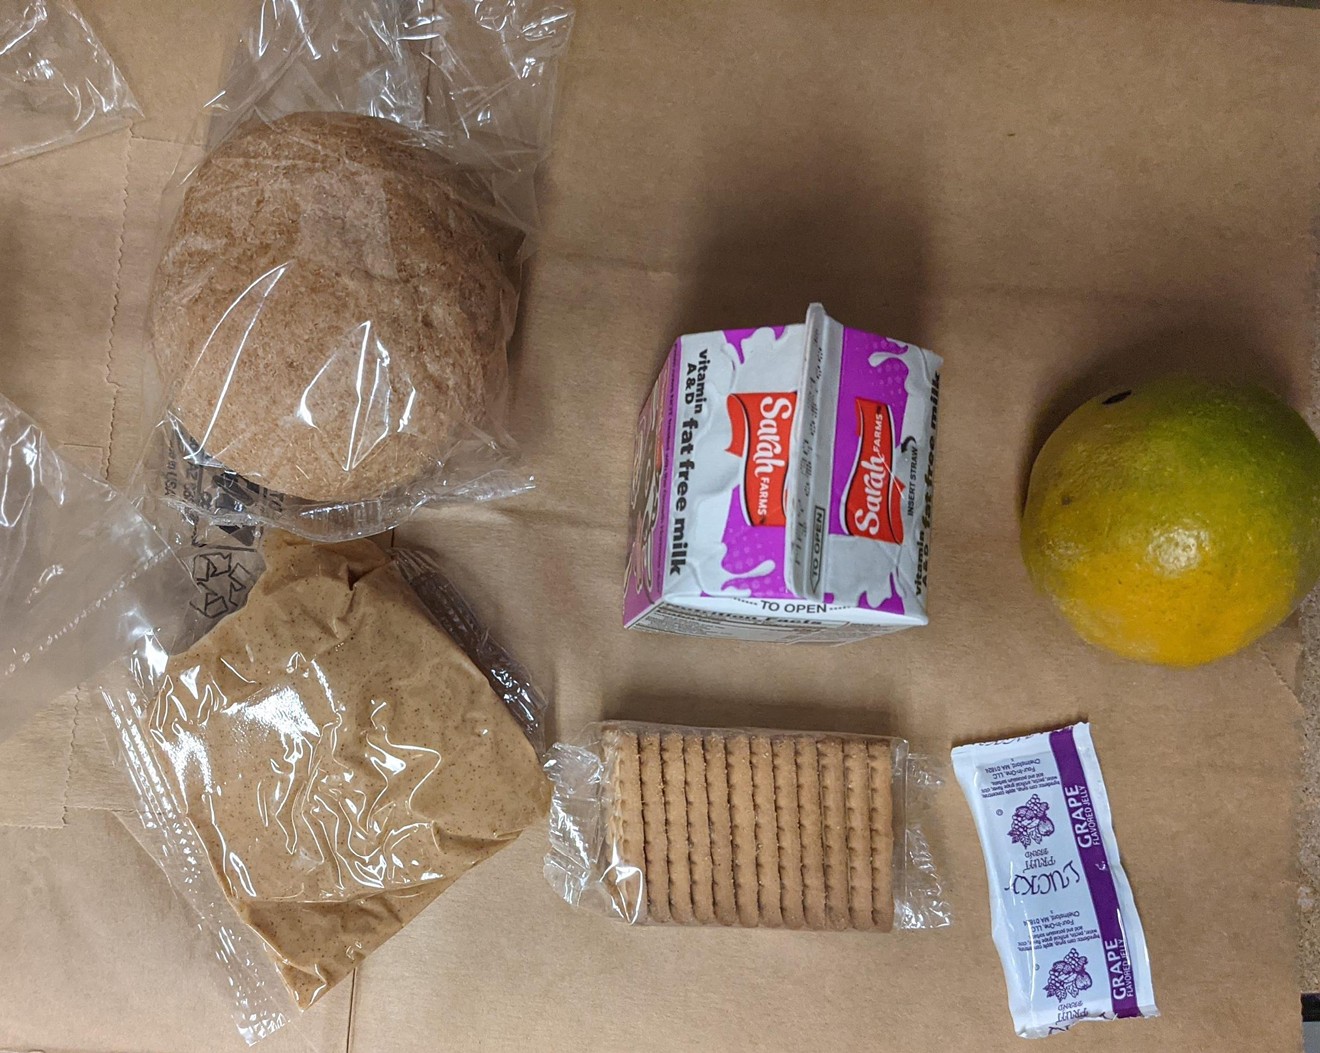 Weekend breakfast at the Maricopa County Jail: peanut butter and "grape flavored jelly."